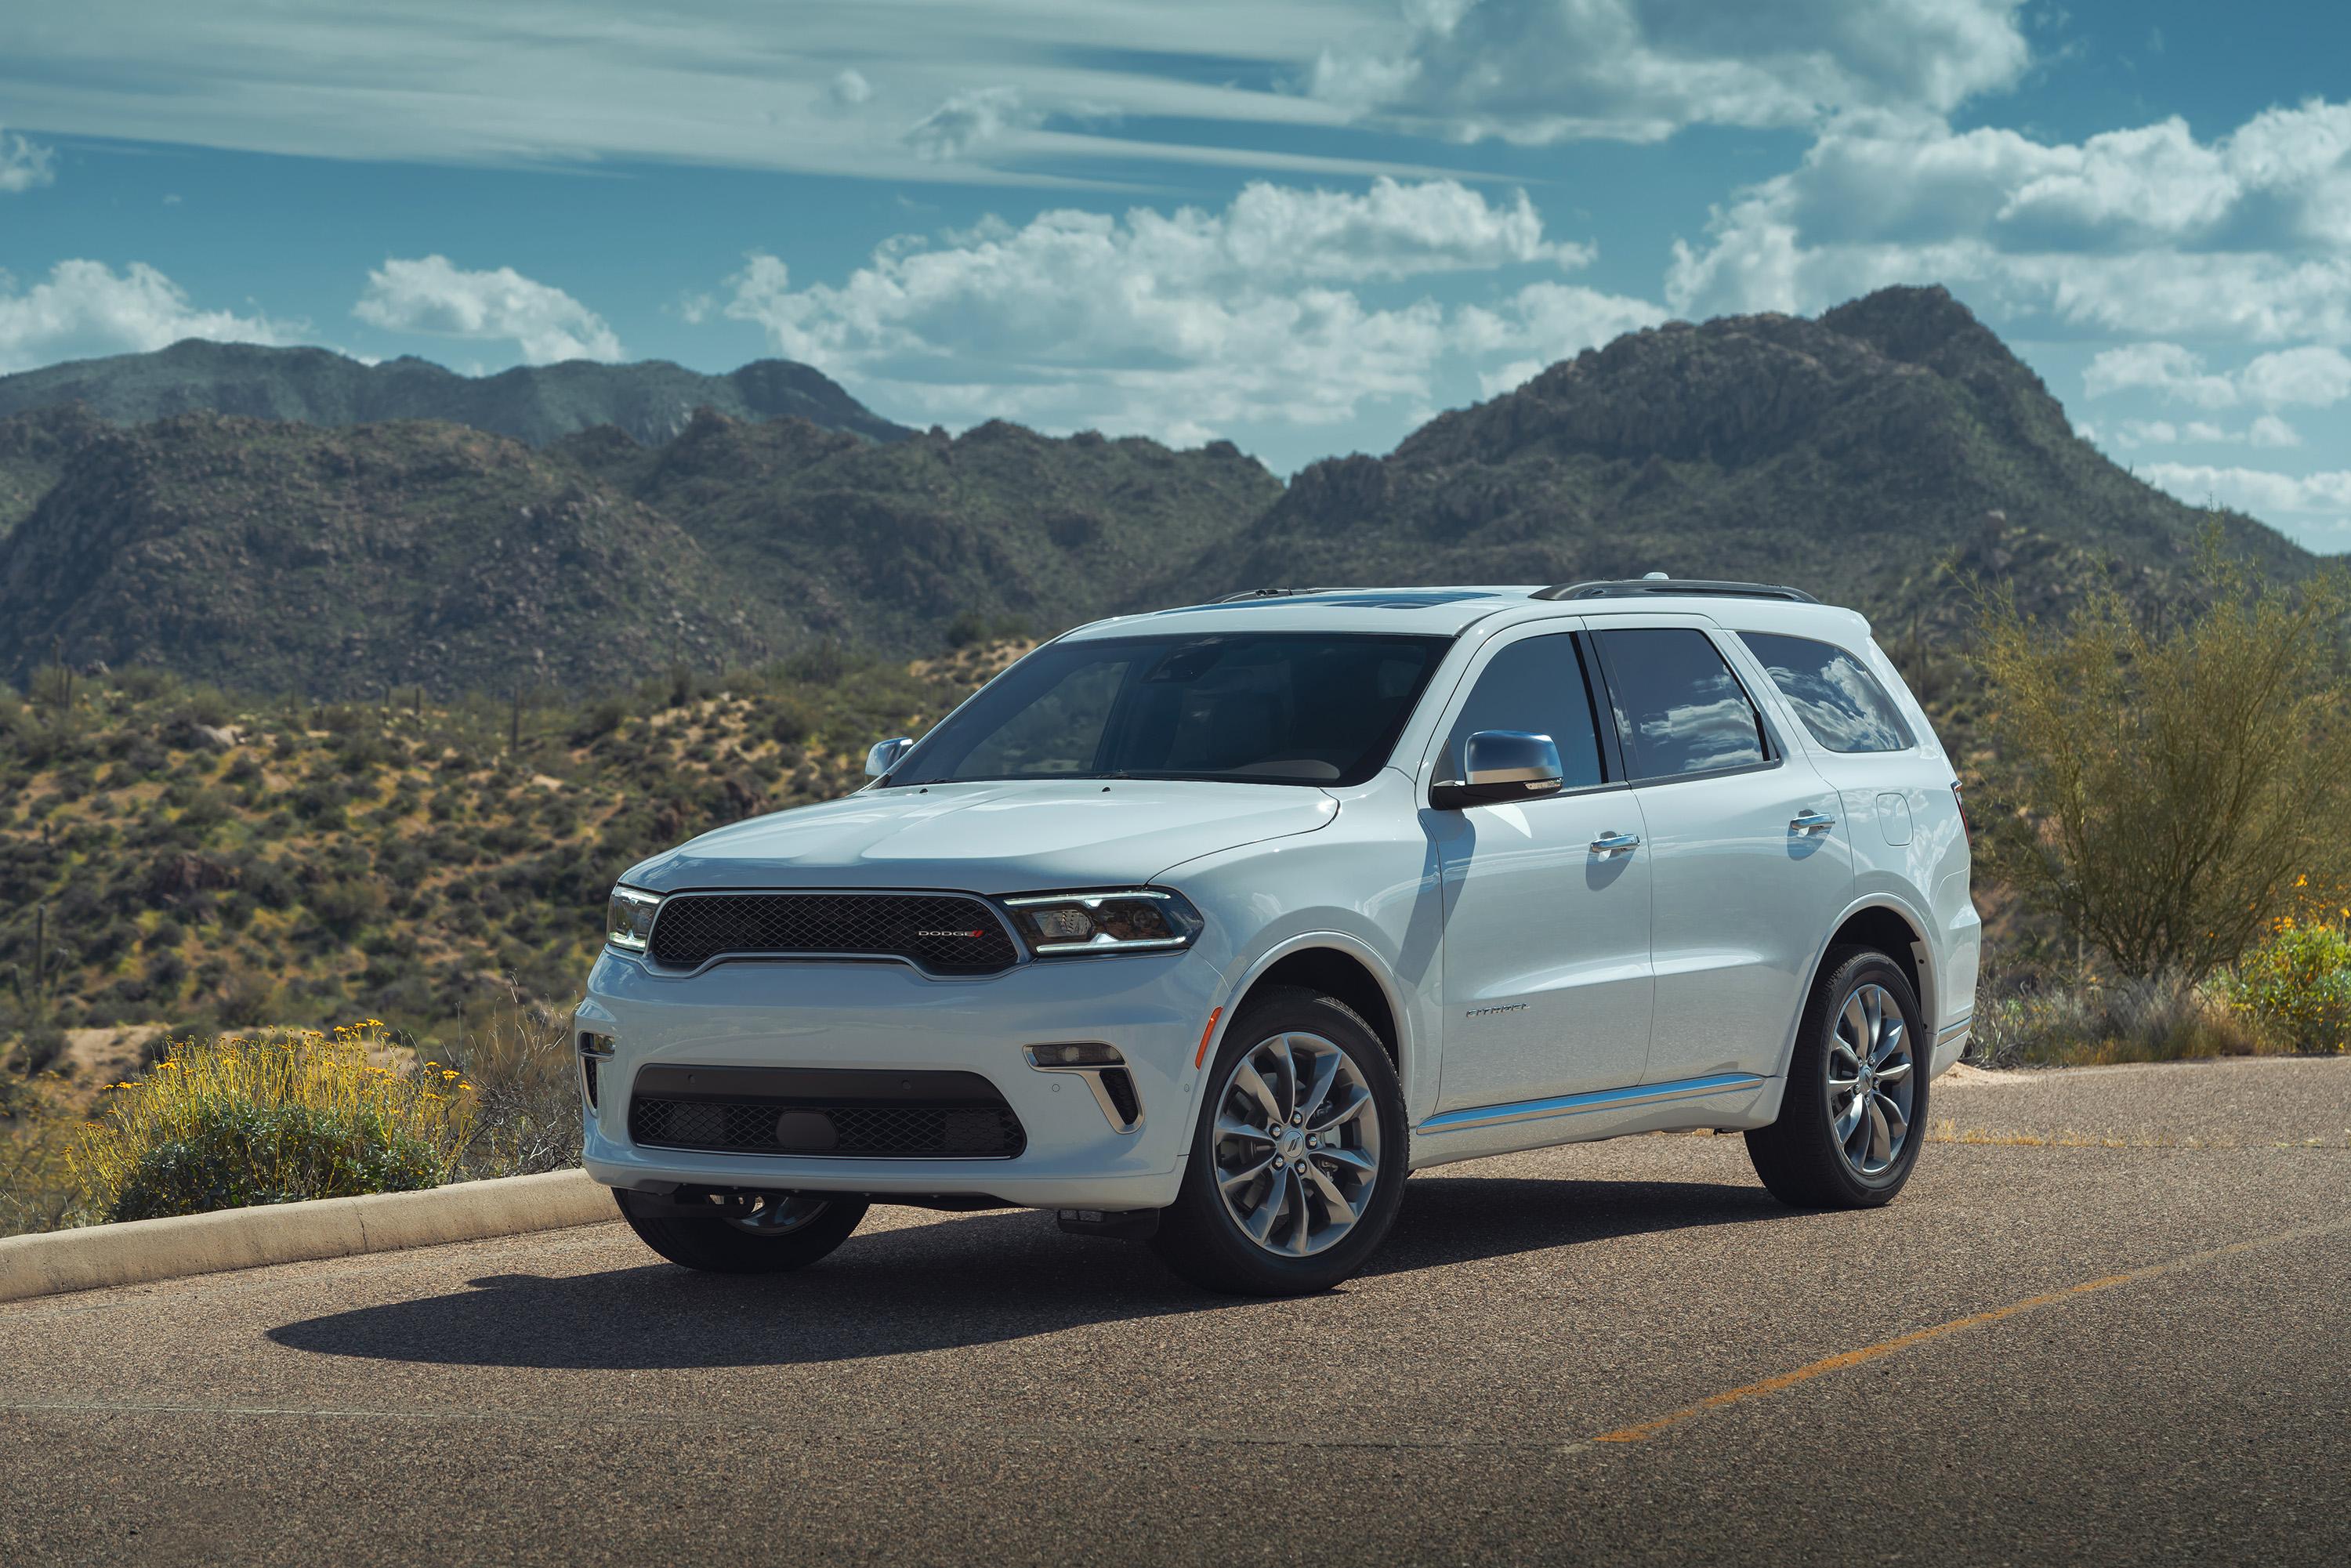 Consumer Reports had a lot of good things to say about the 2022 Dodge Durango, despite giving it a low score.